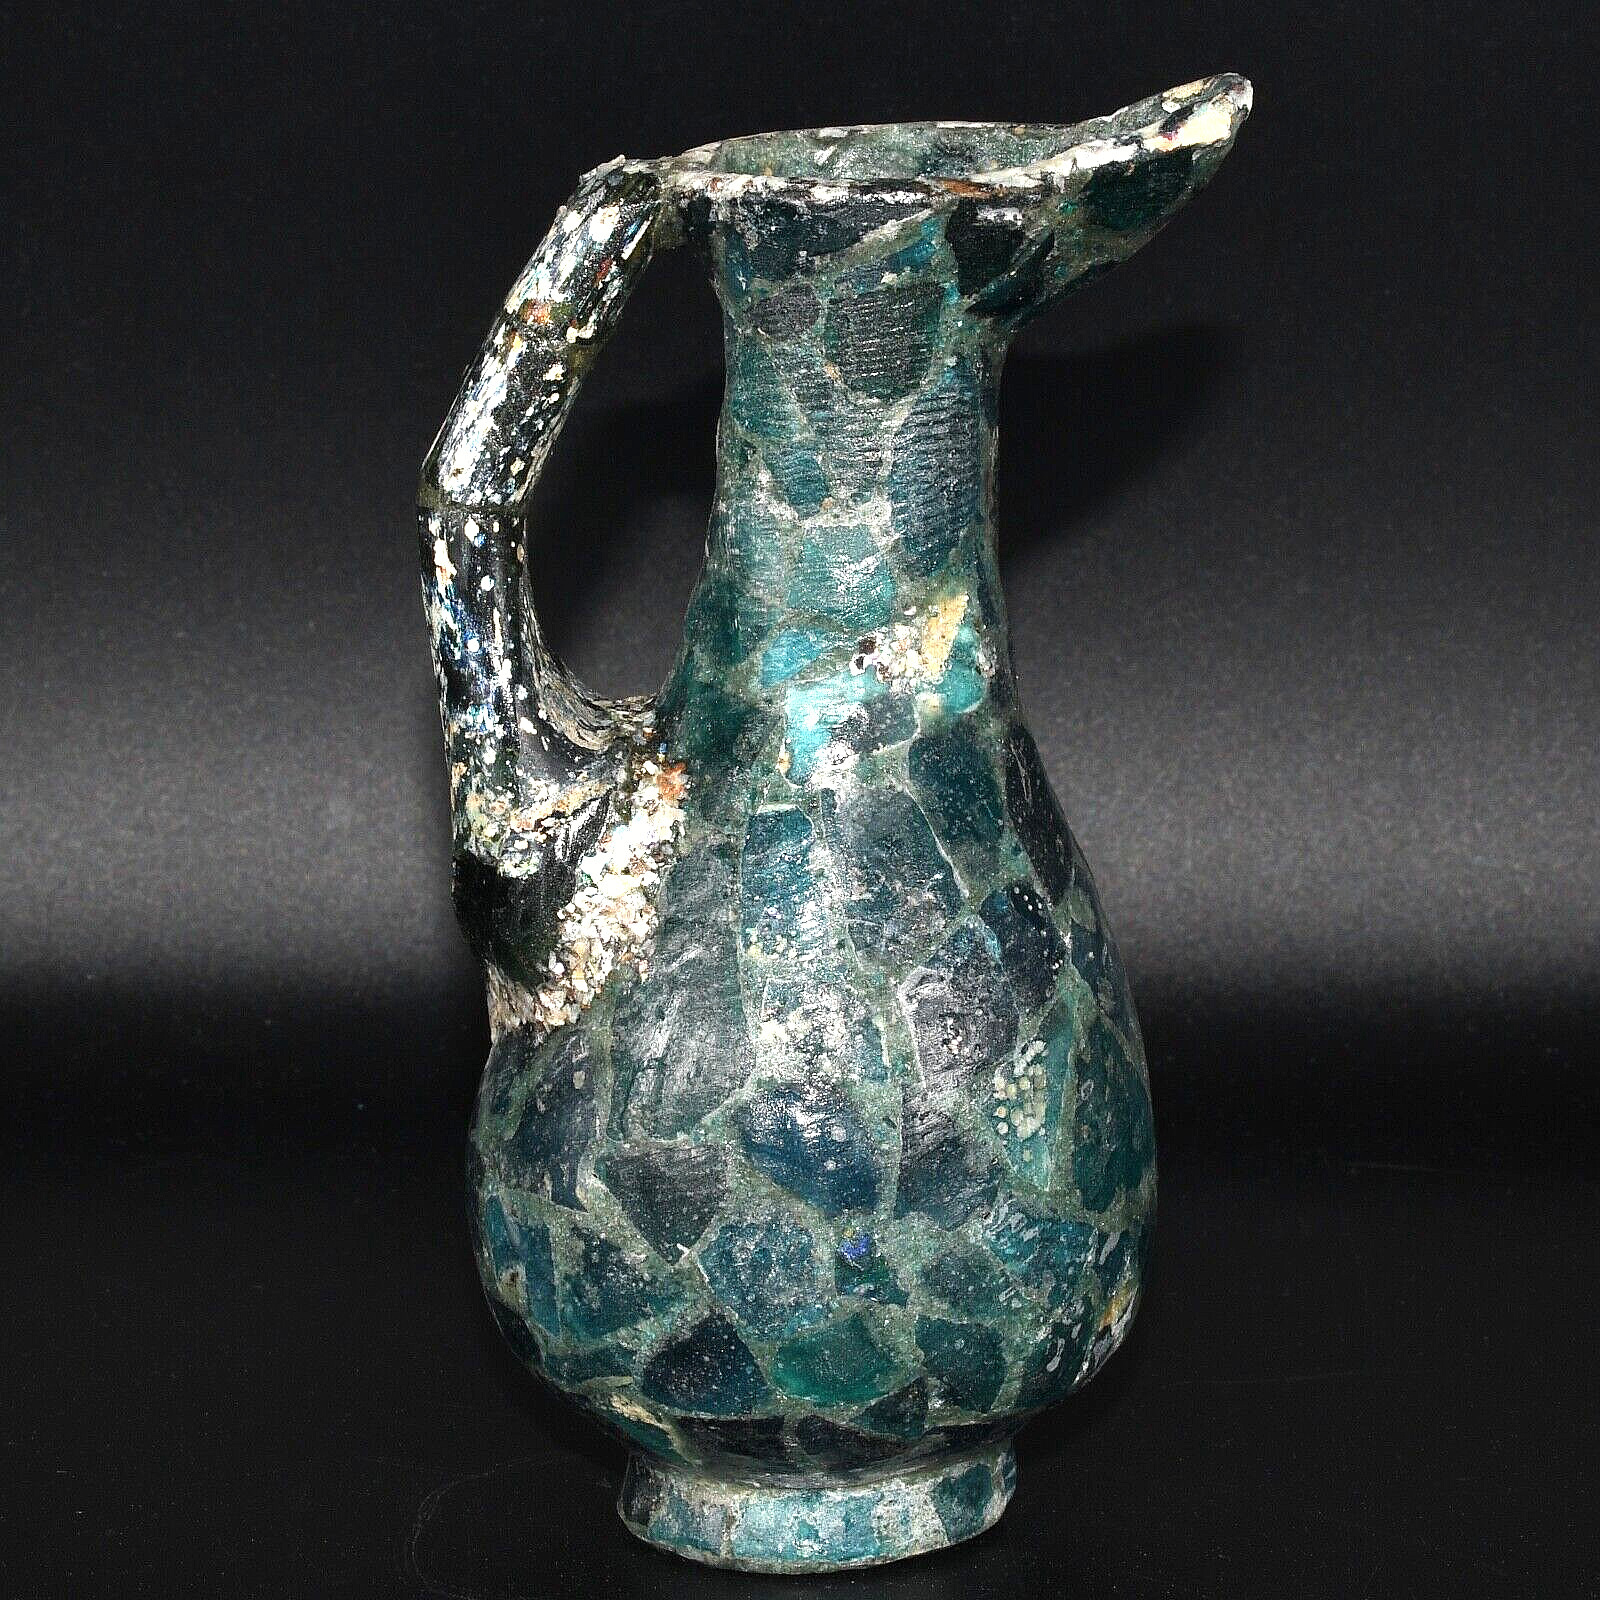 Genuine Ancient Roman Glass Jug Circa 1st - 3rd Century AD from Middle East